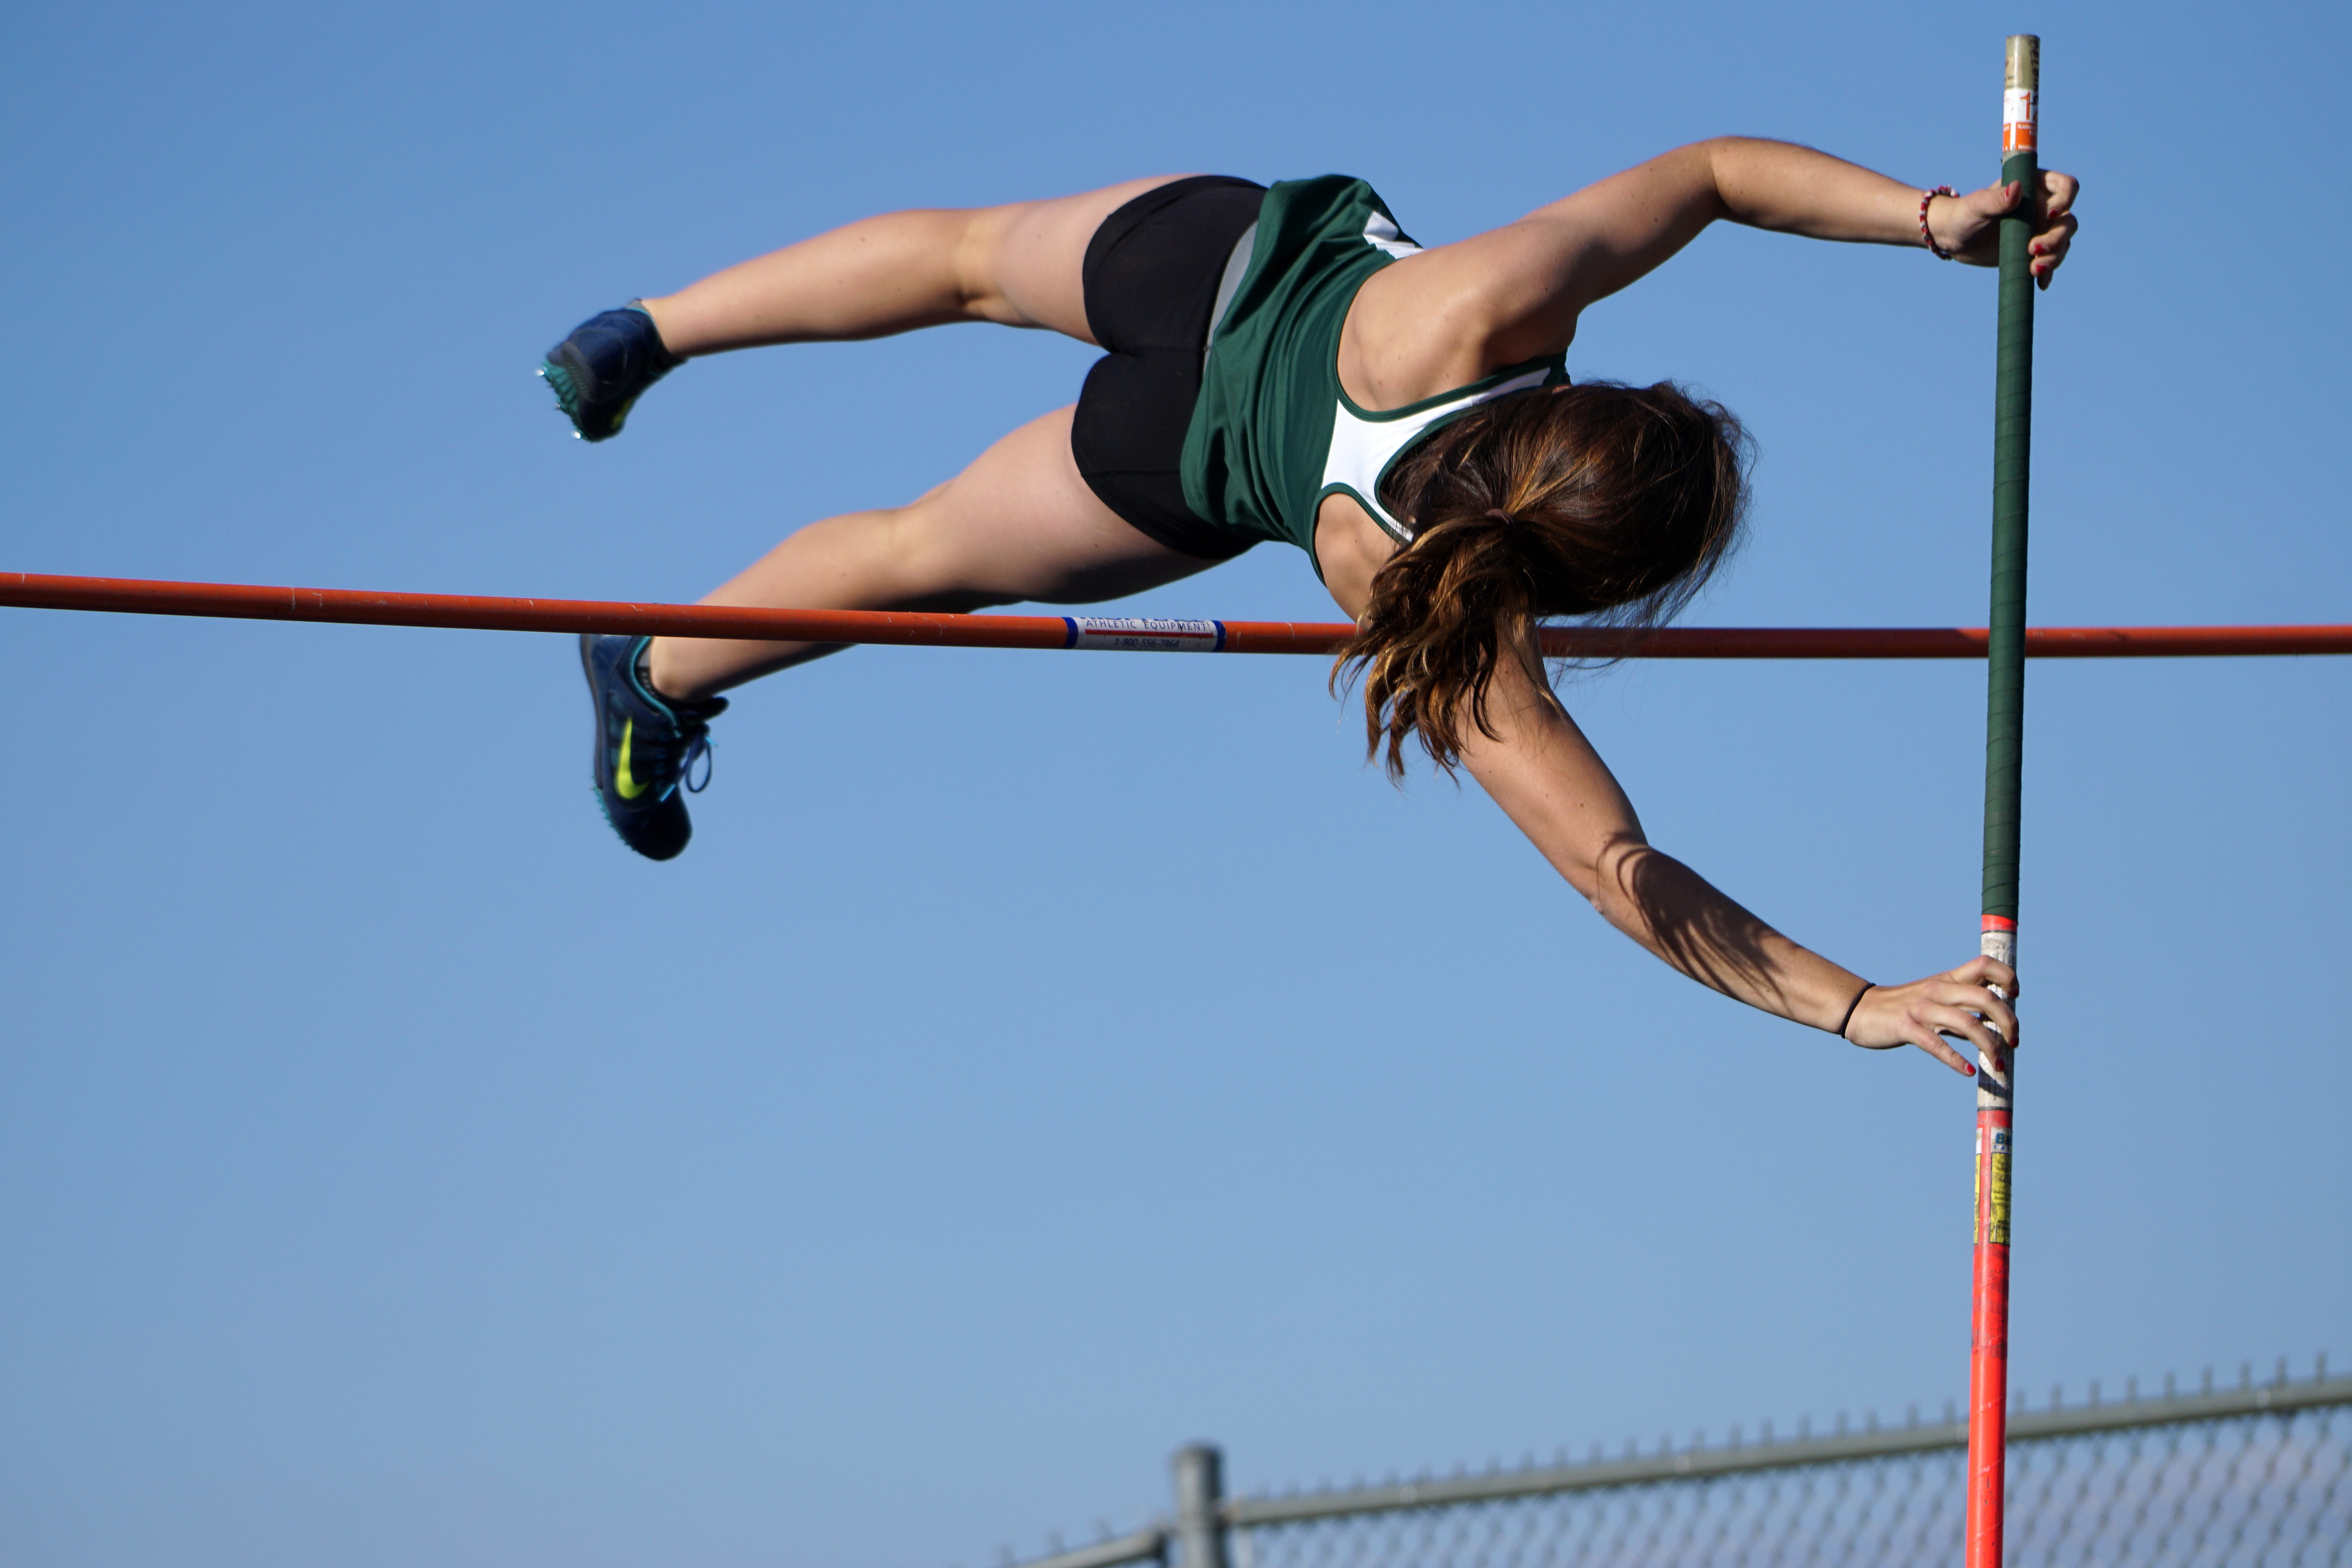 Woman Pole Vaulting over the bar free photo. browse by category. 